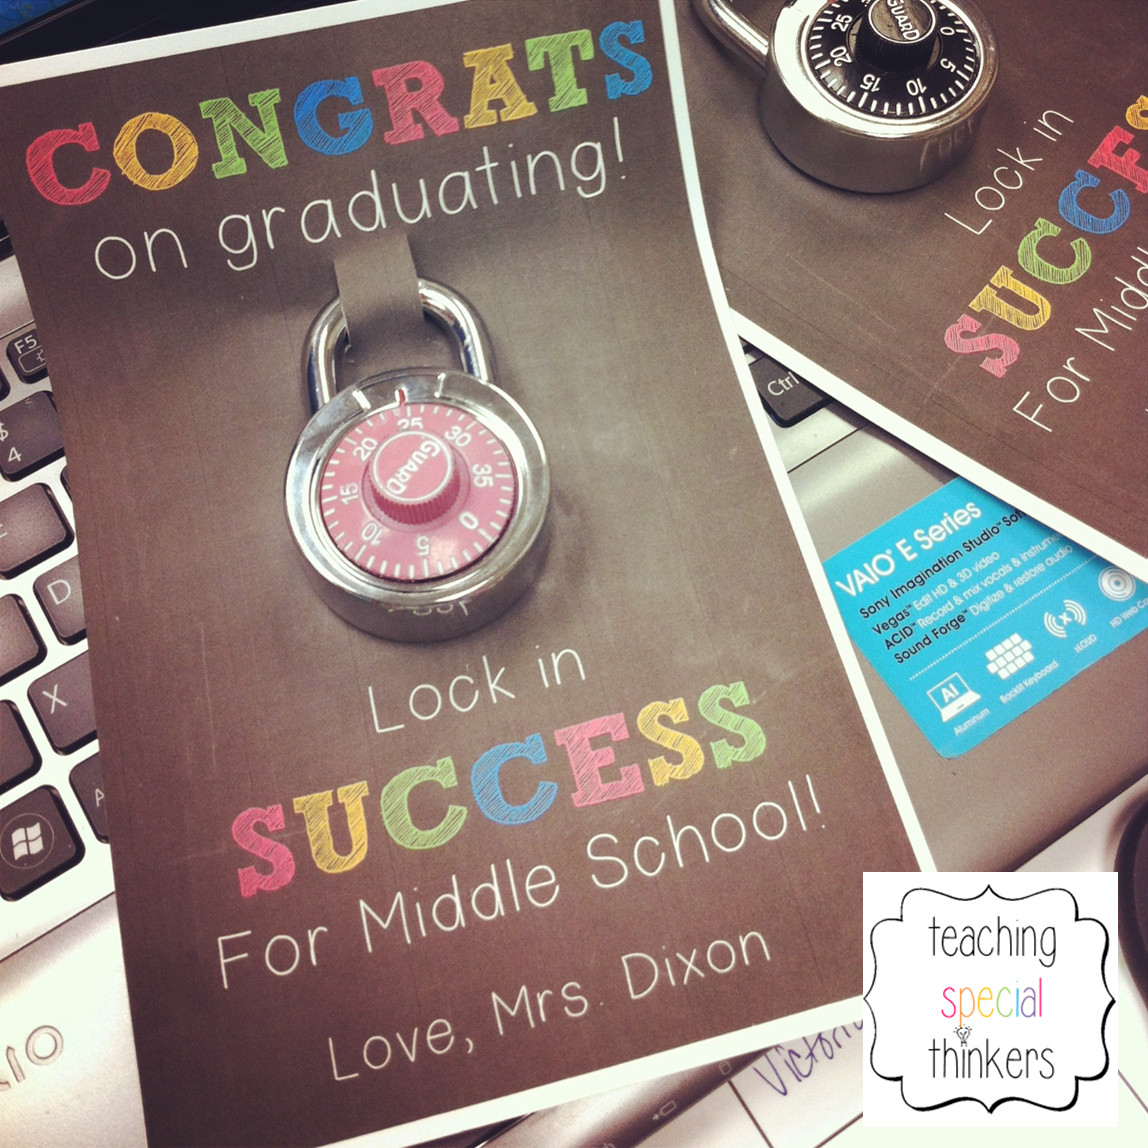 Middle School Graduation Gift Ideas
 Lock in Success – Student Gift for soon to be Middle